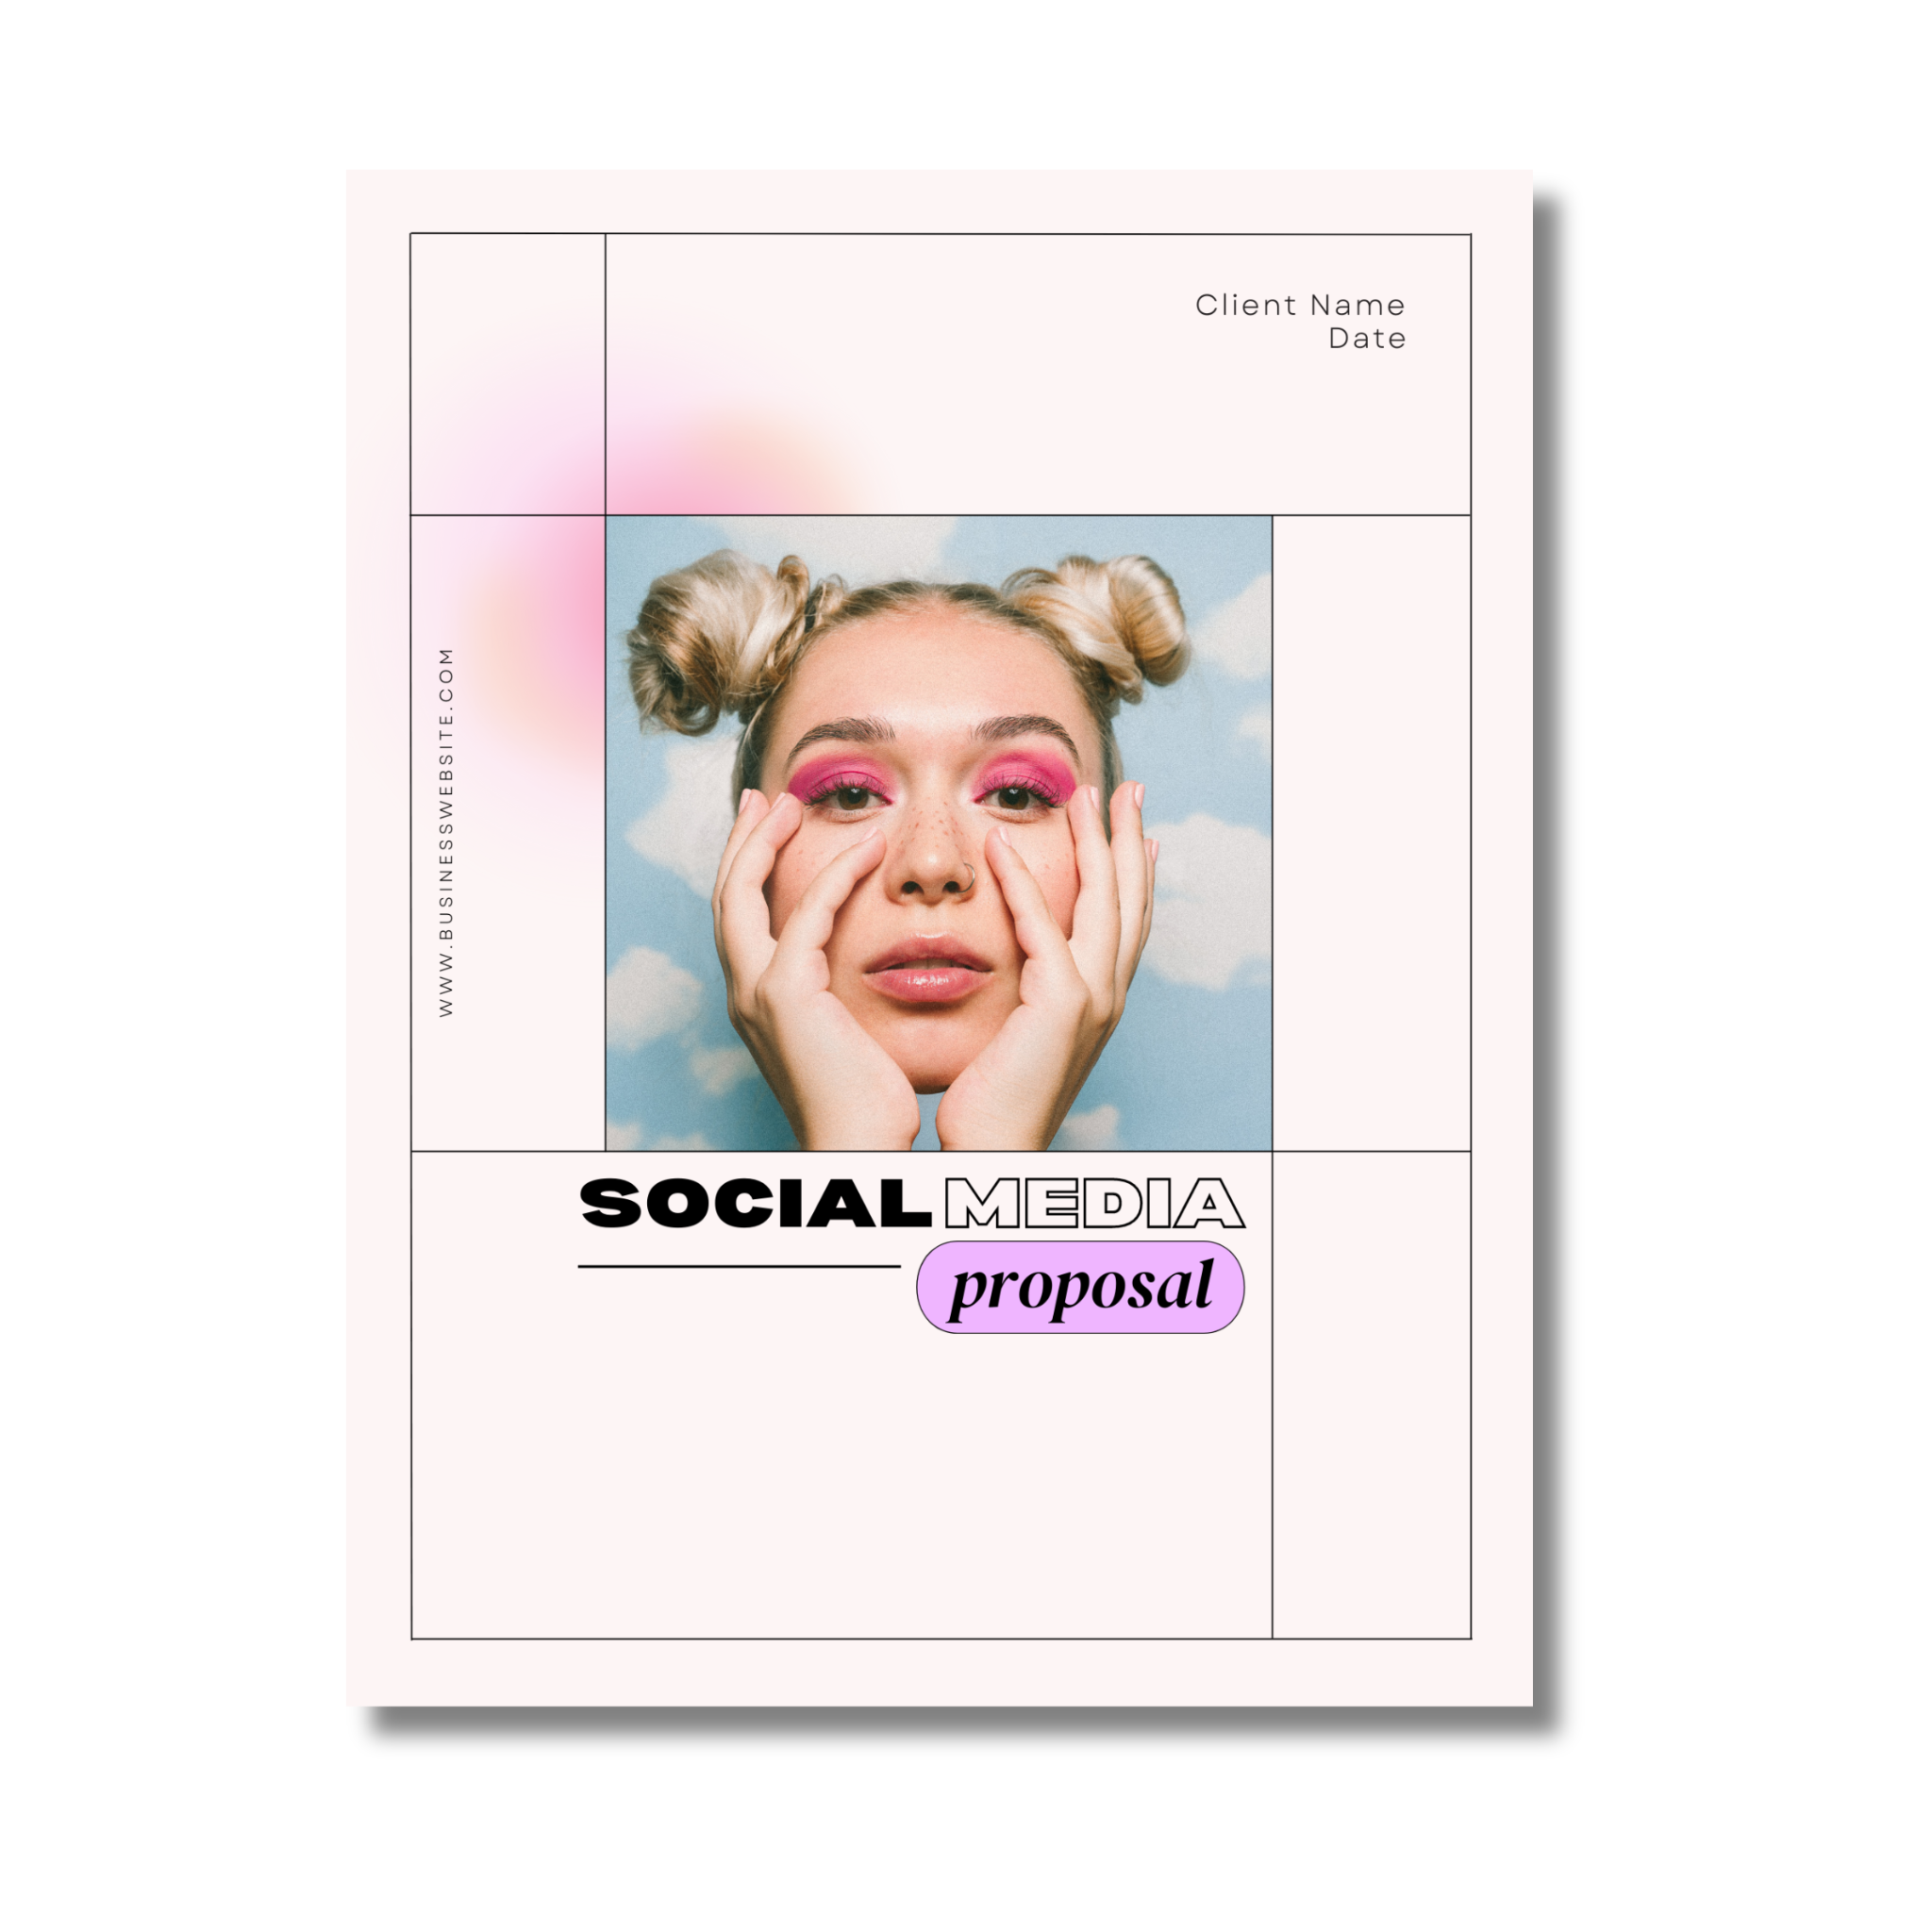 Social Media Proposal Template - In Living Color